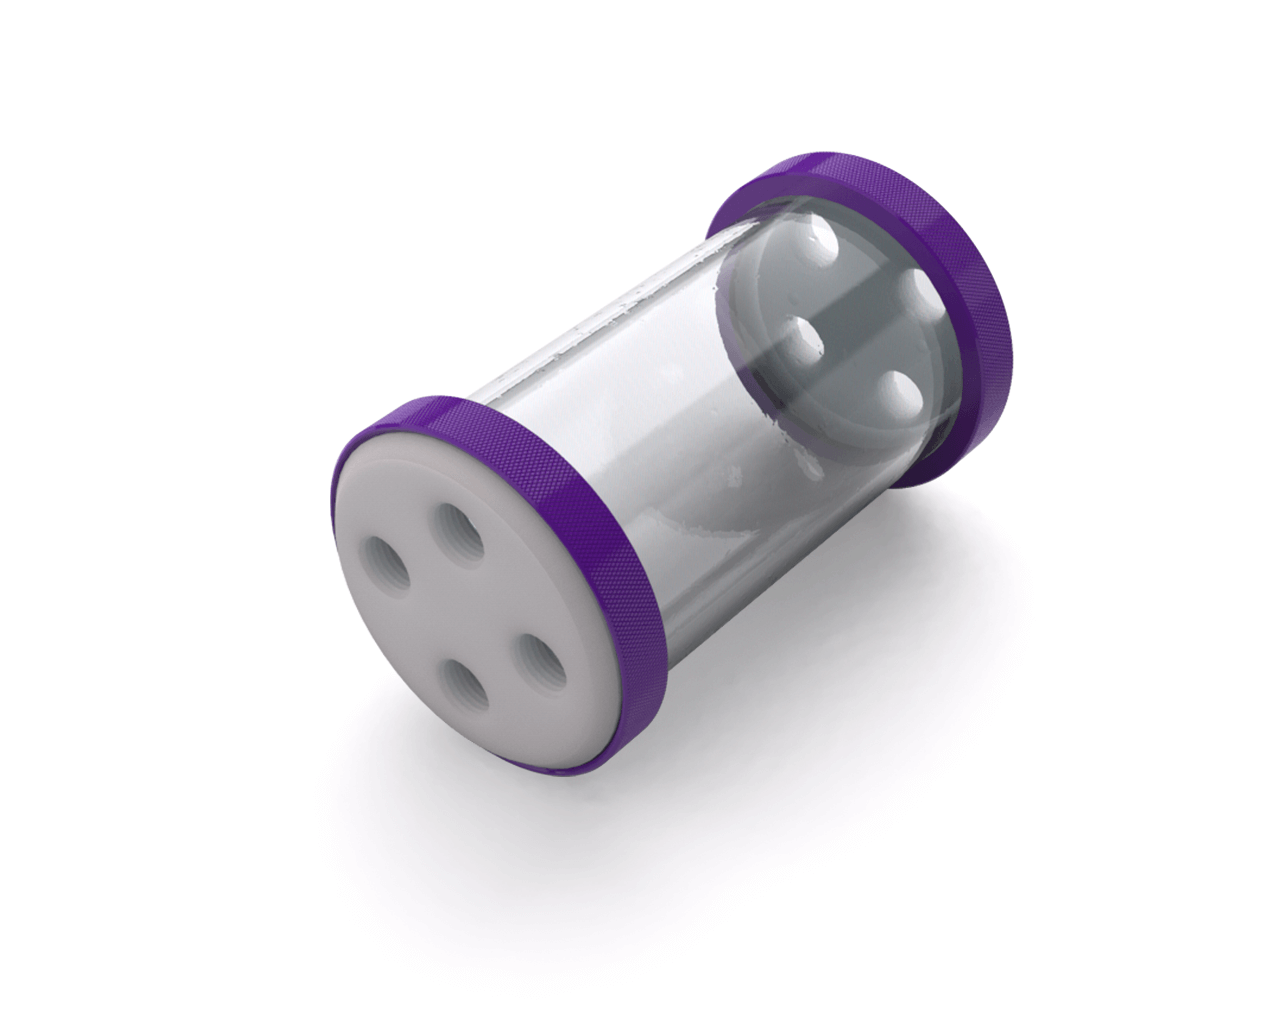 PrimoChill CTR Low Profile Phase II Reservoir - White POM - 120mm - PrimoChill - KEEPING IT COOL Purple